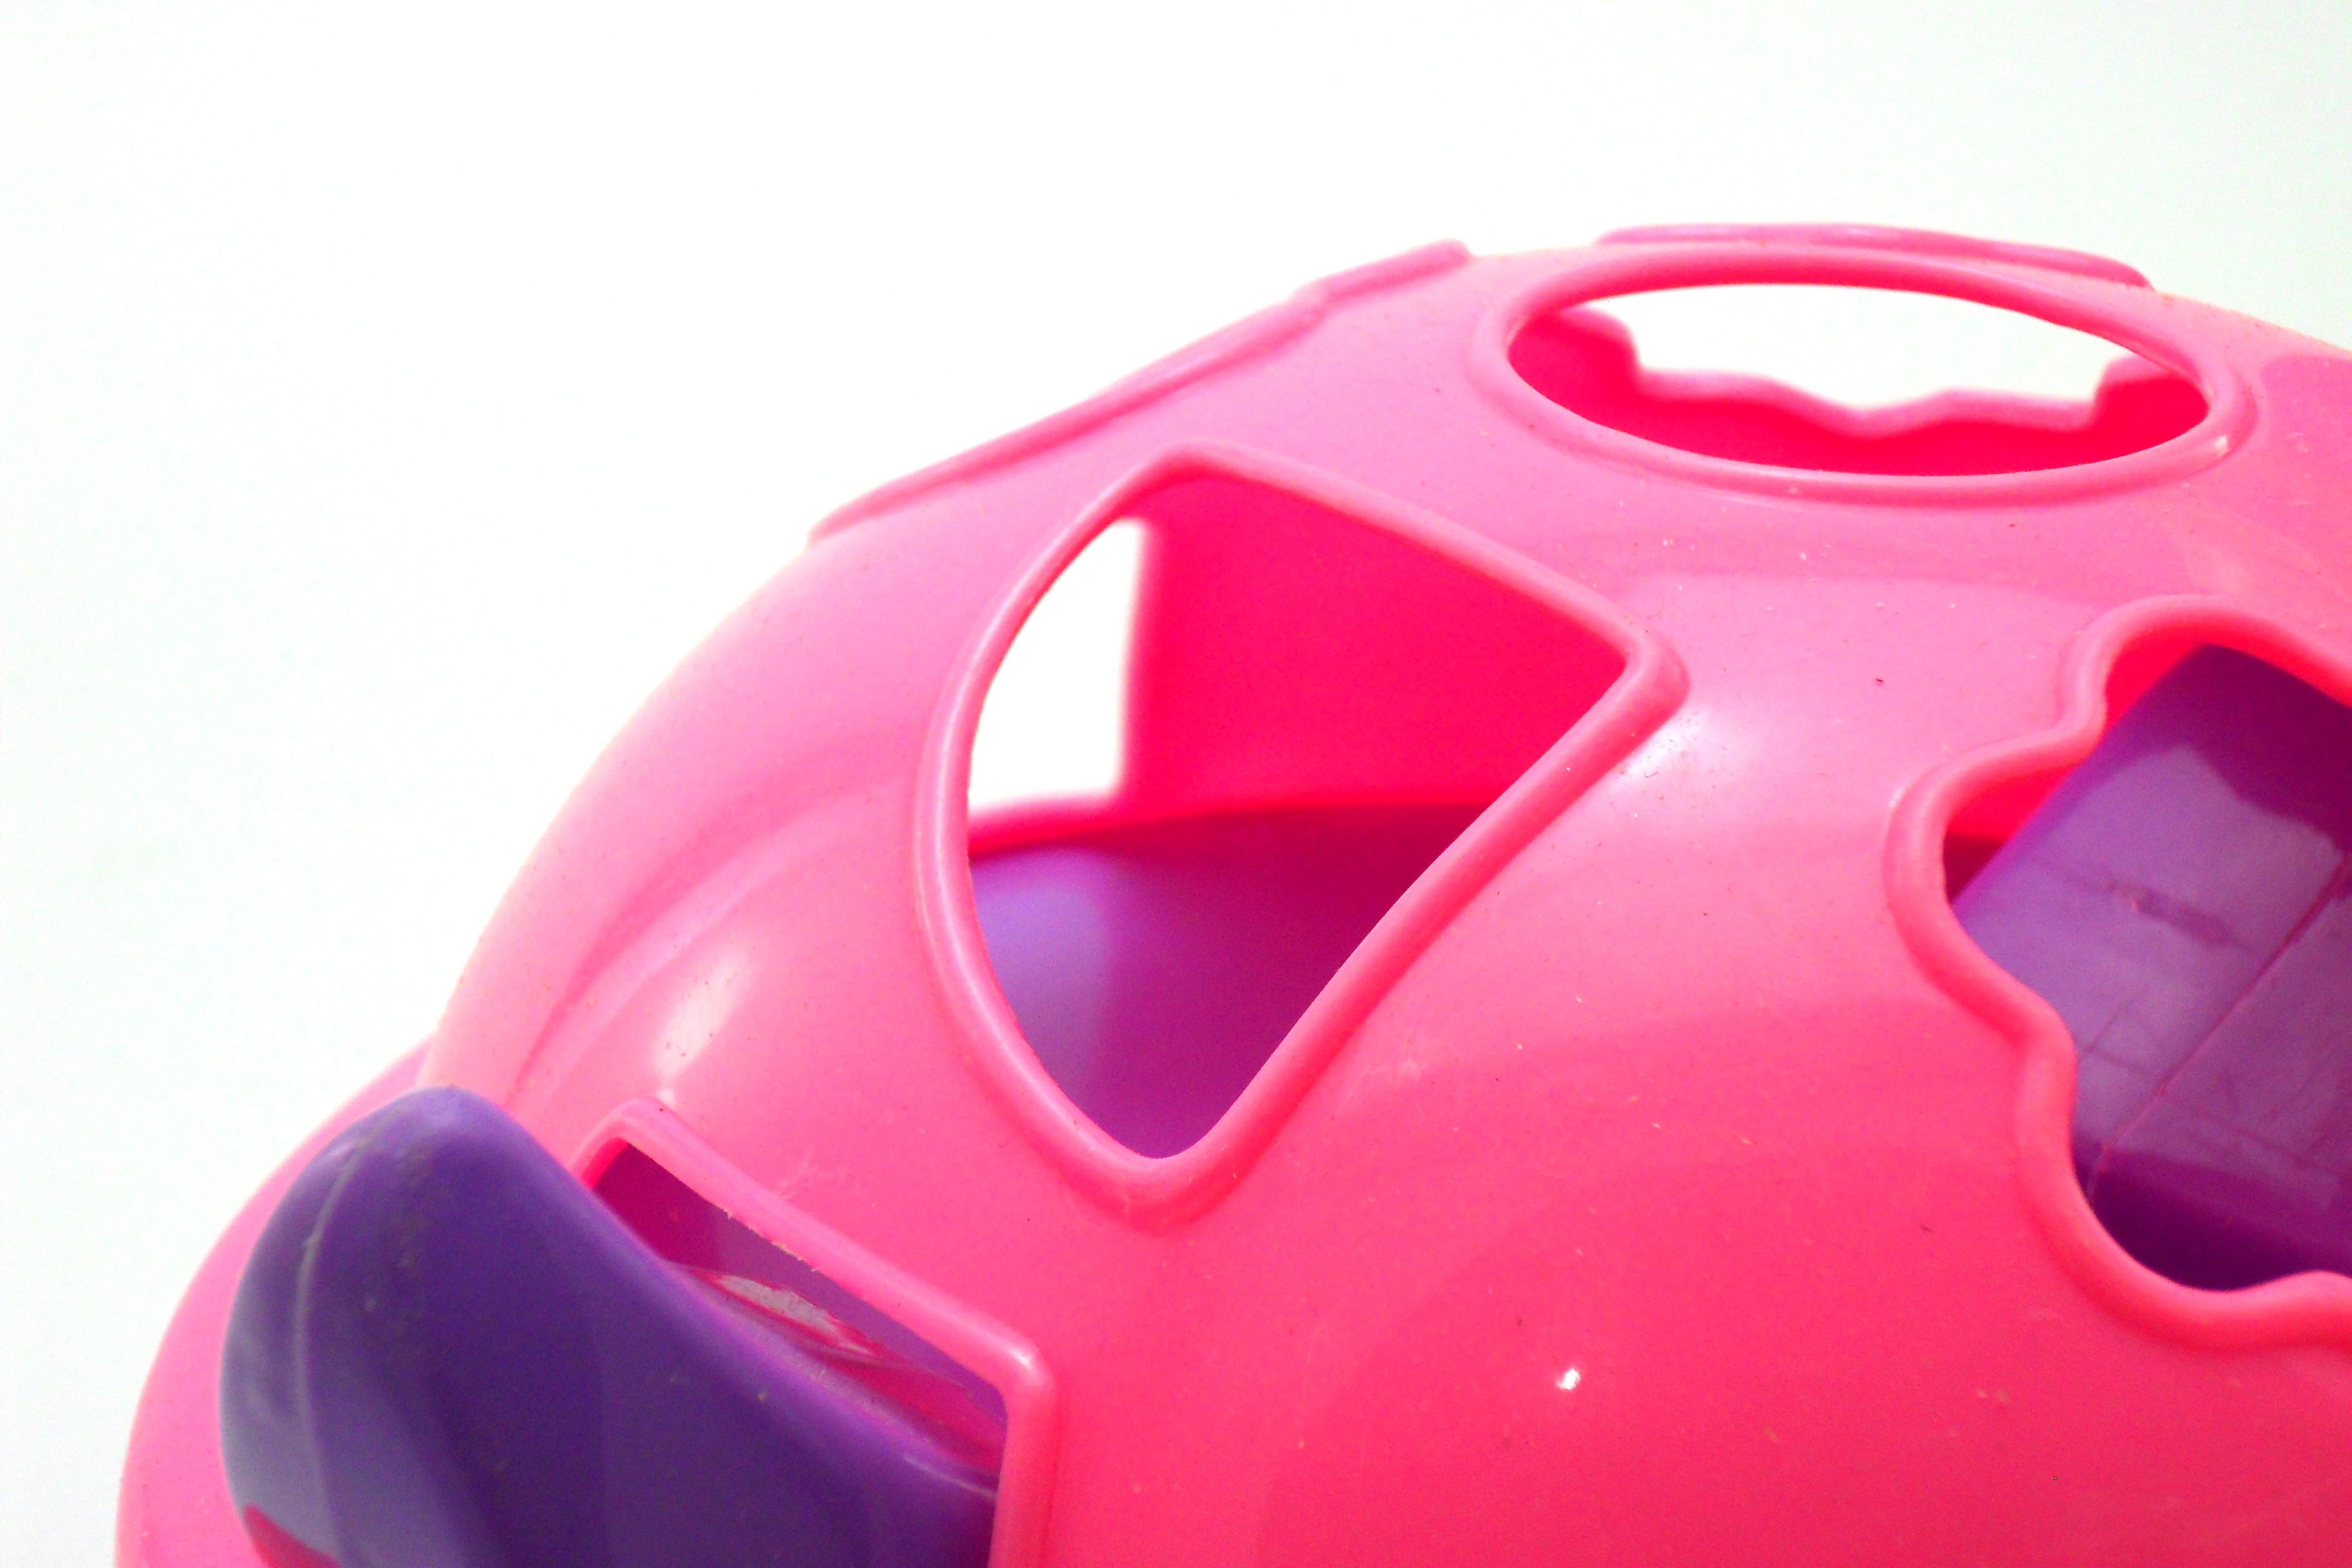 Toy close up photo